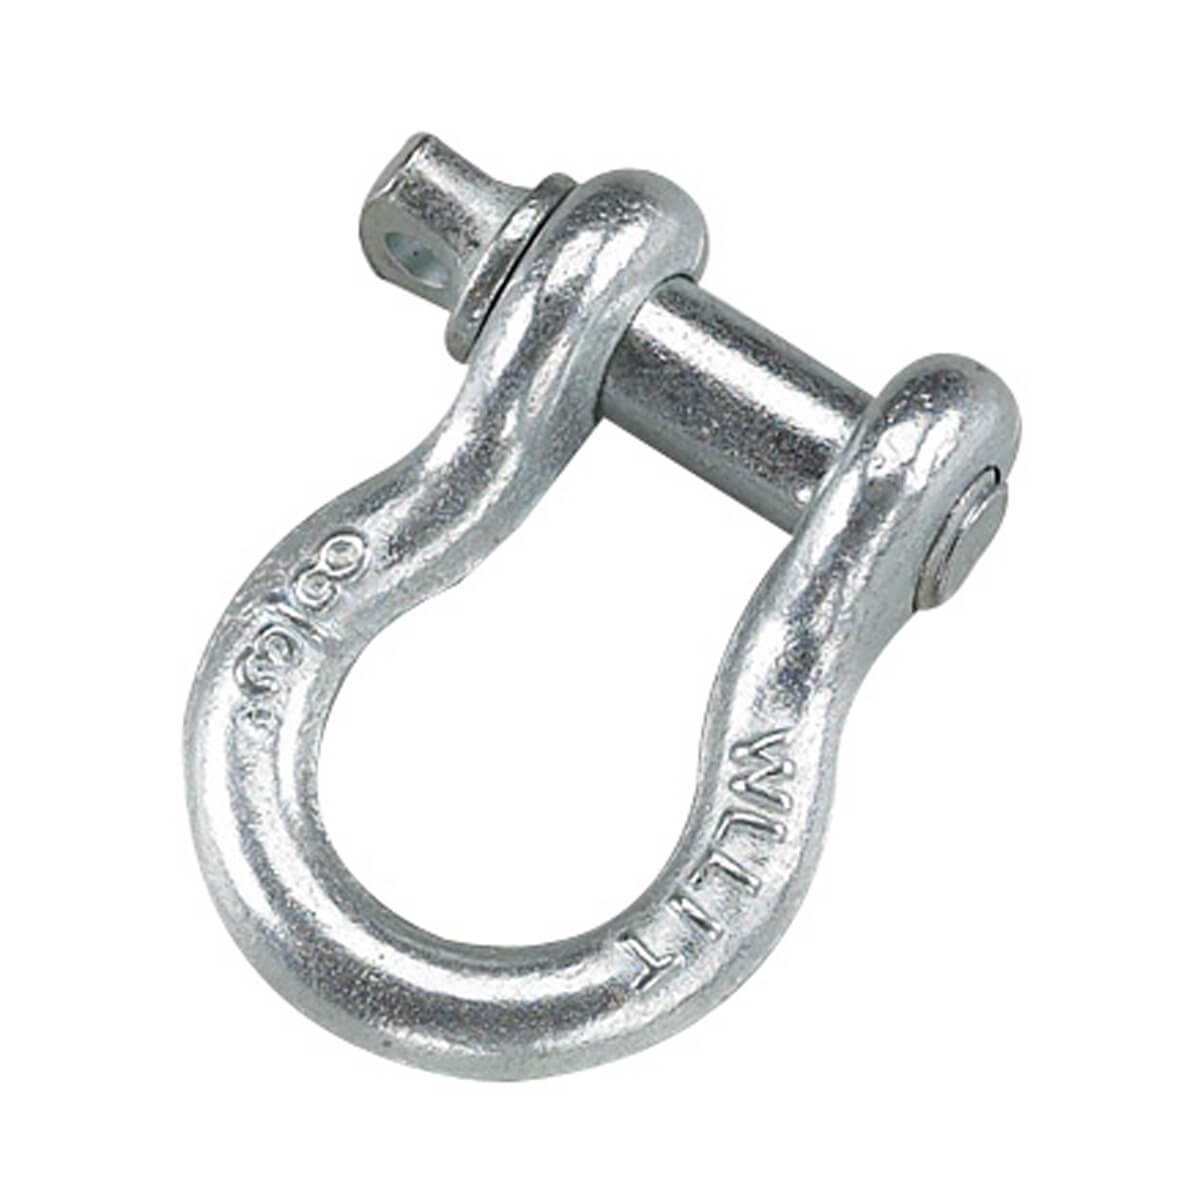 Screw Pin Anchor Shackle - 3/8-in